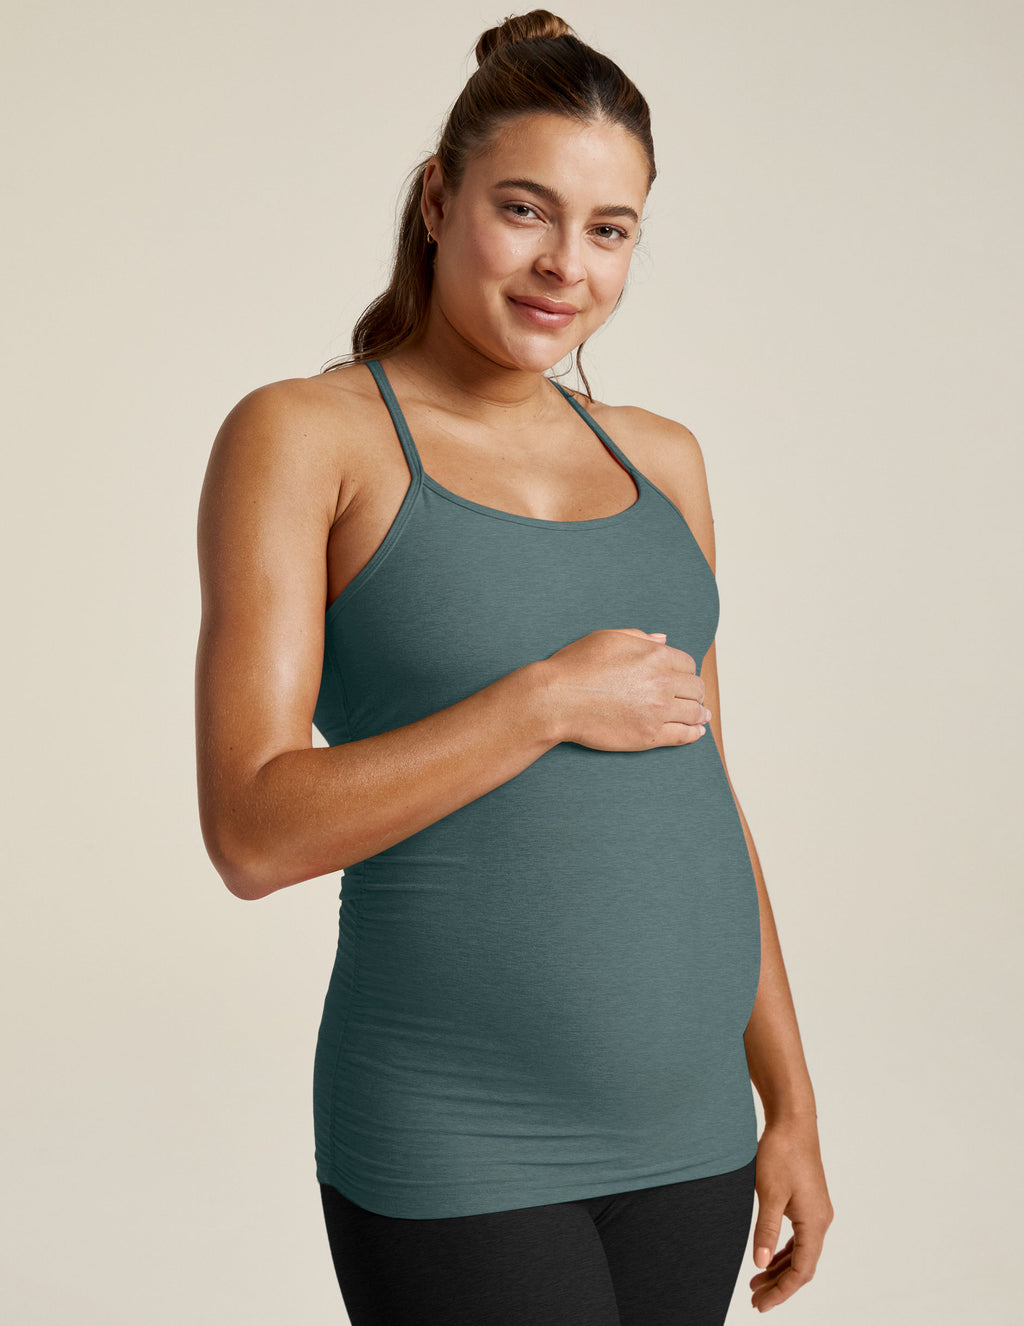 Spacedye Keep Your Cool Maternity Slim Racerback Tank Featured Image